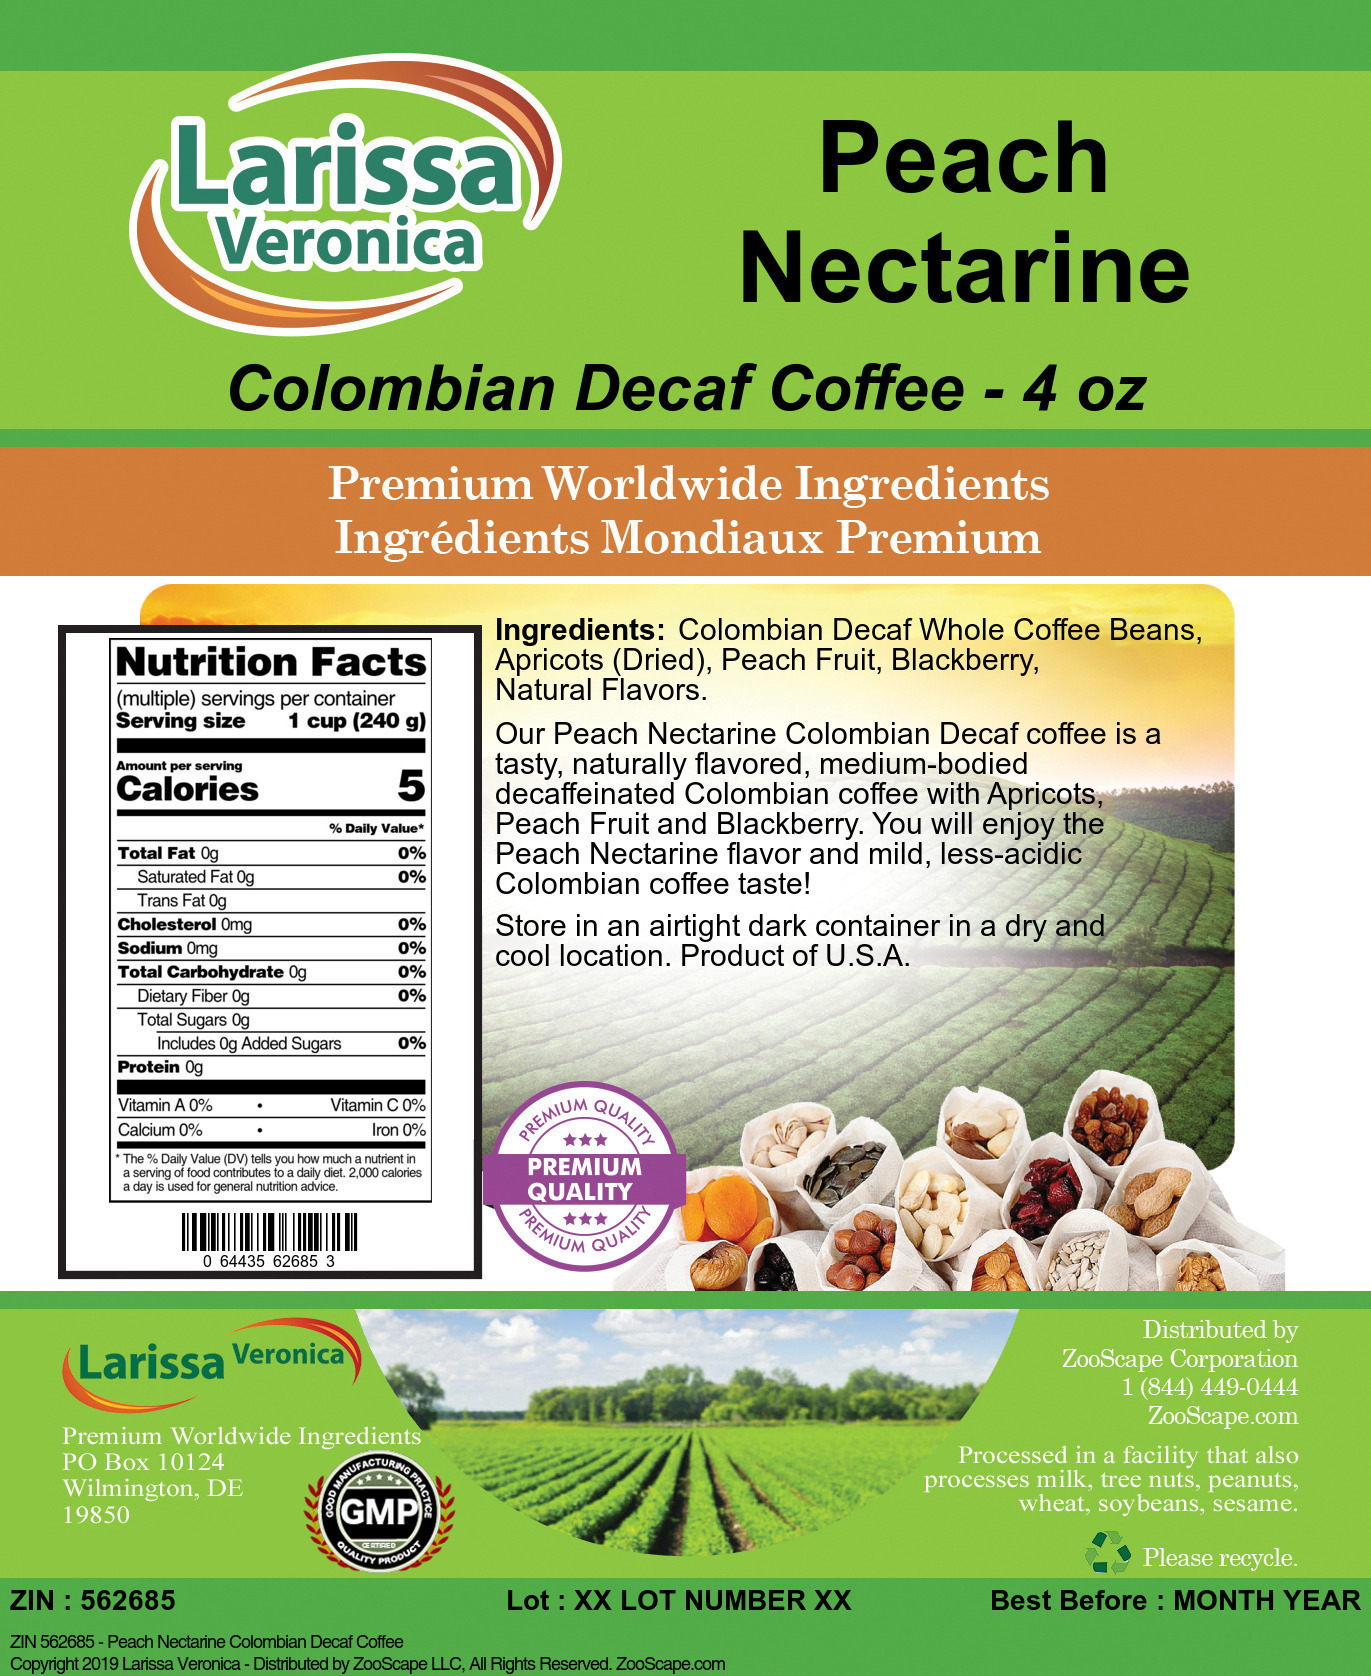 Peach Nectarine Colombian Decaf Coffee - Label